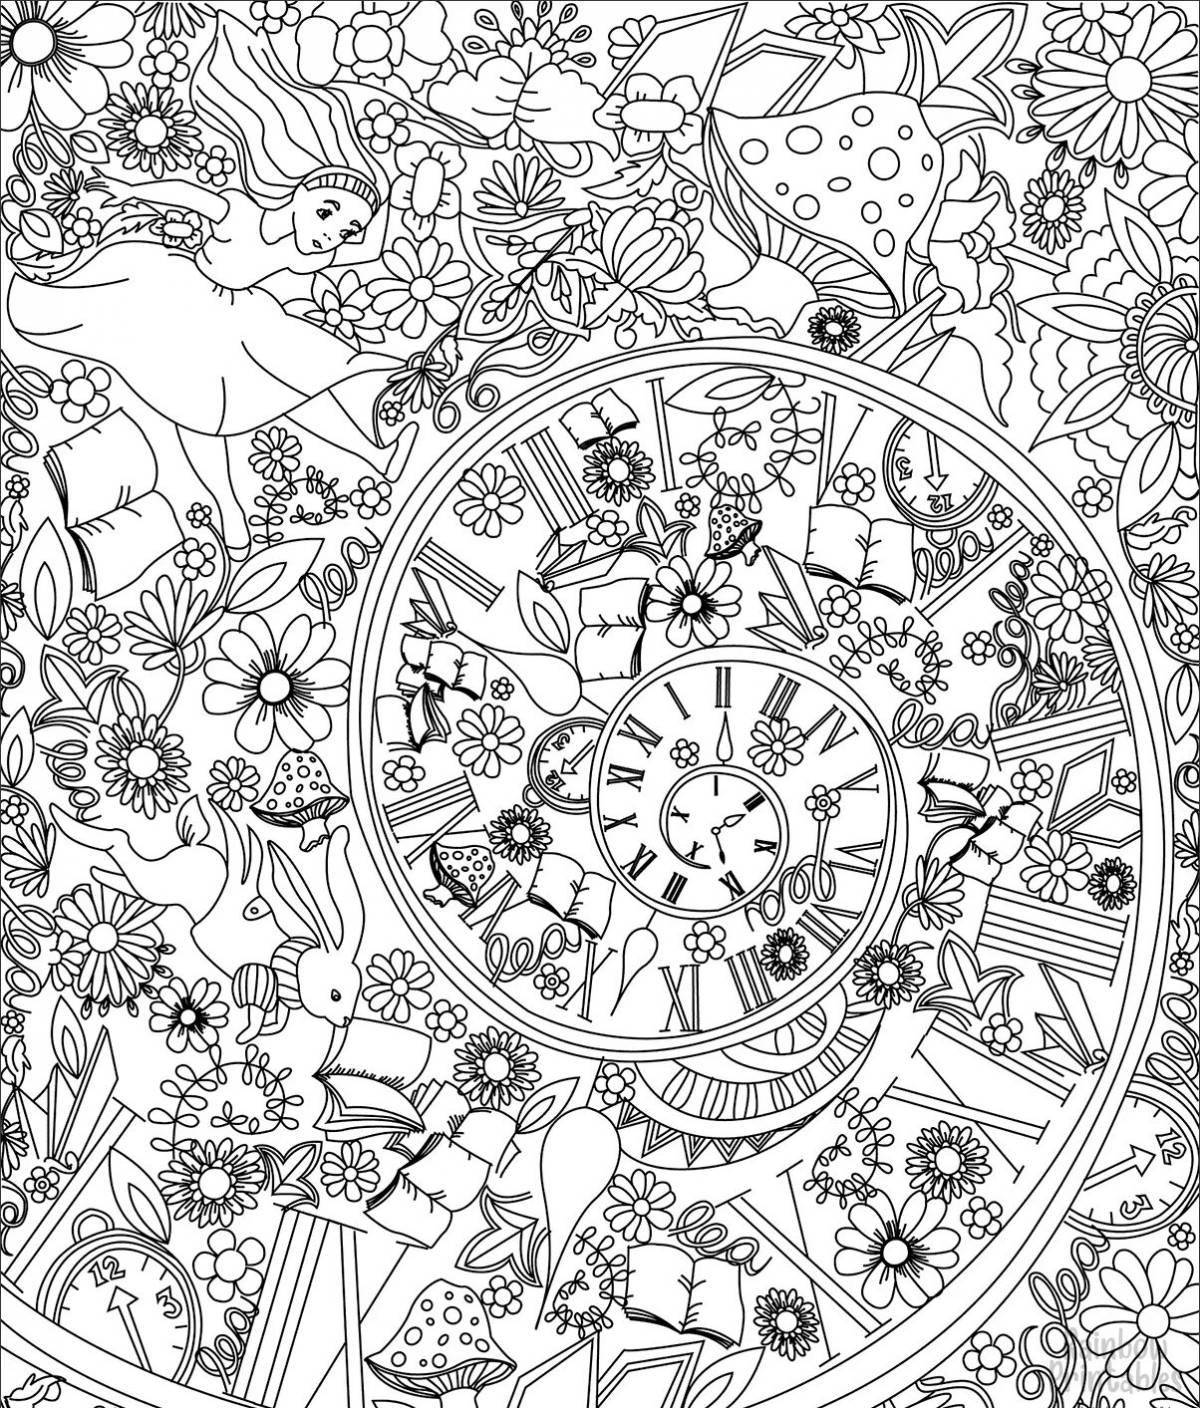 Charming coloring alice in wonderland antistress